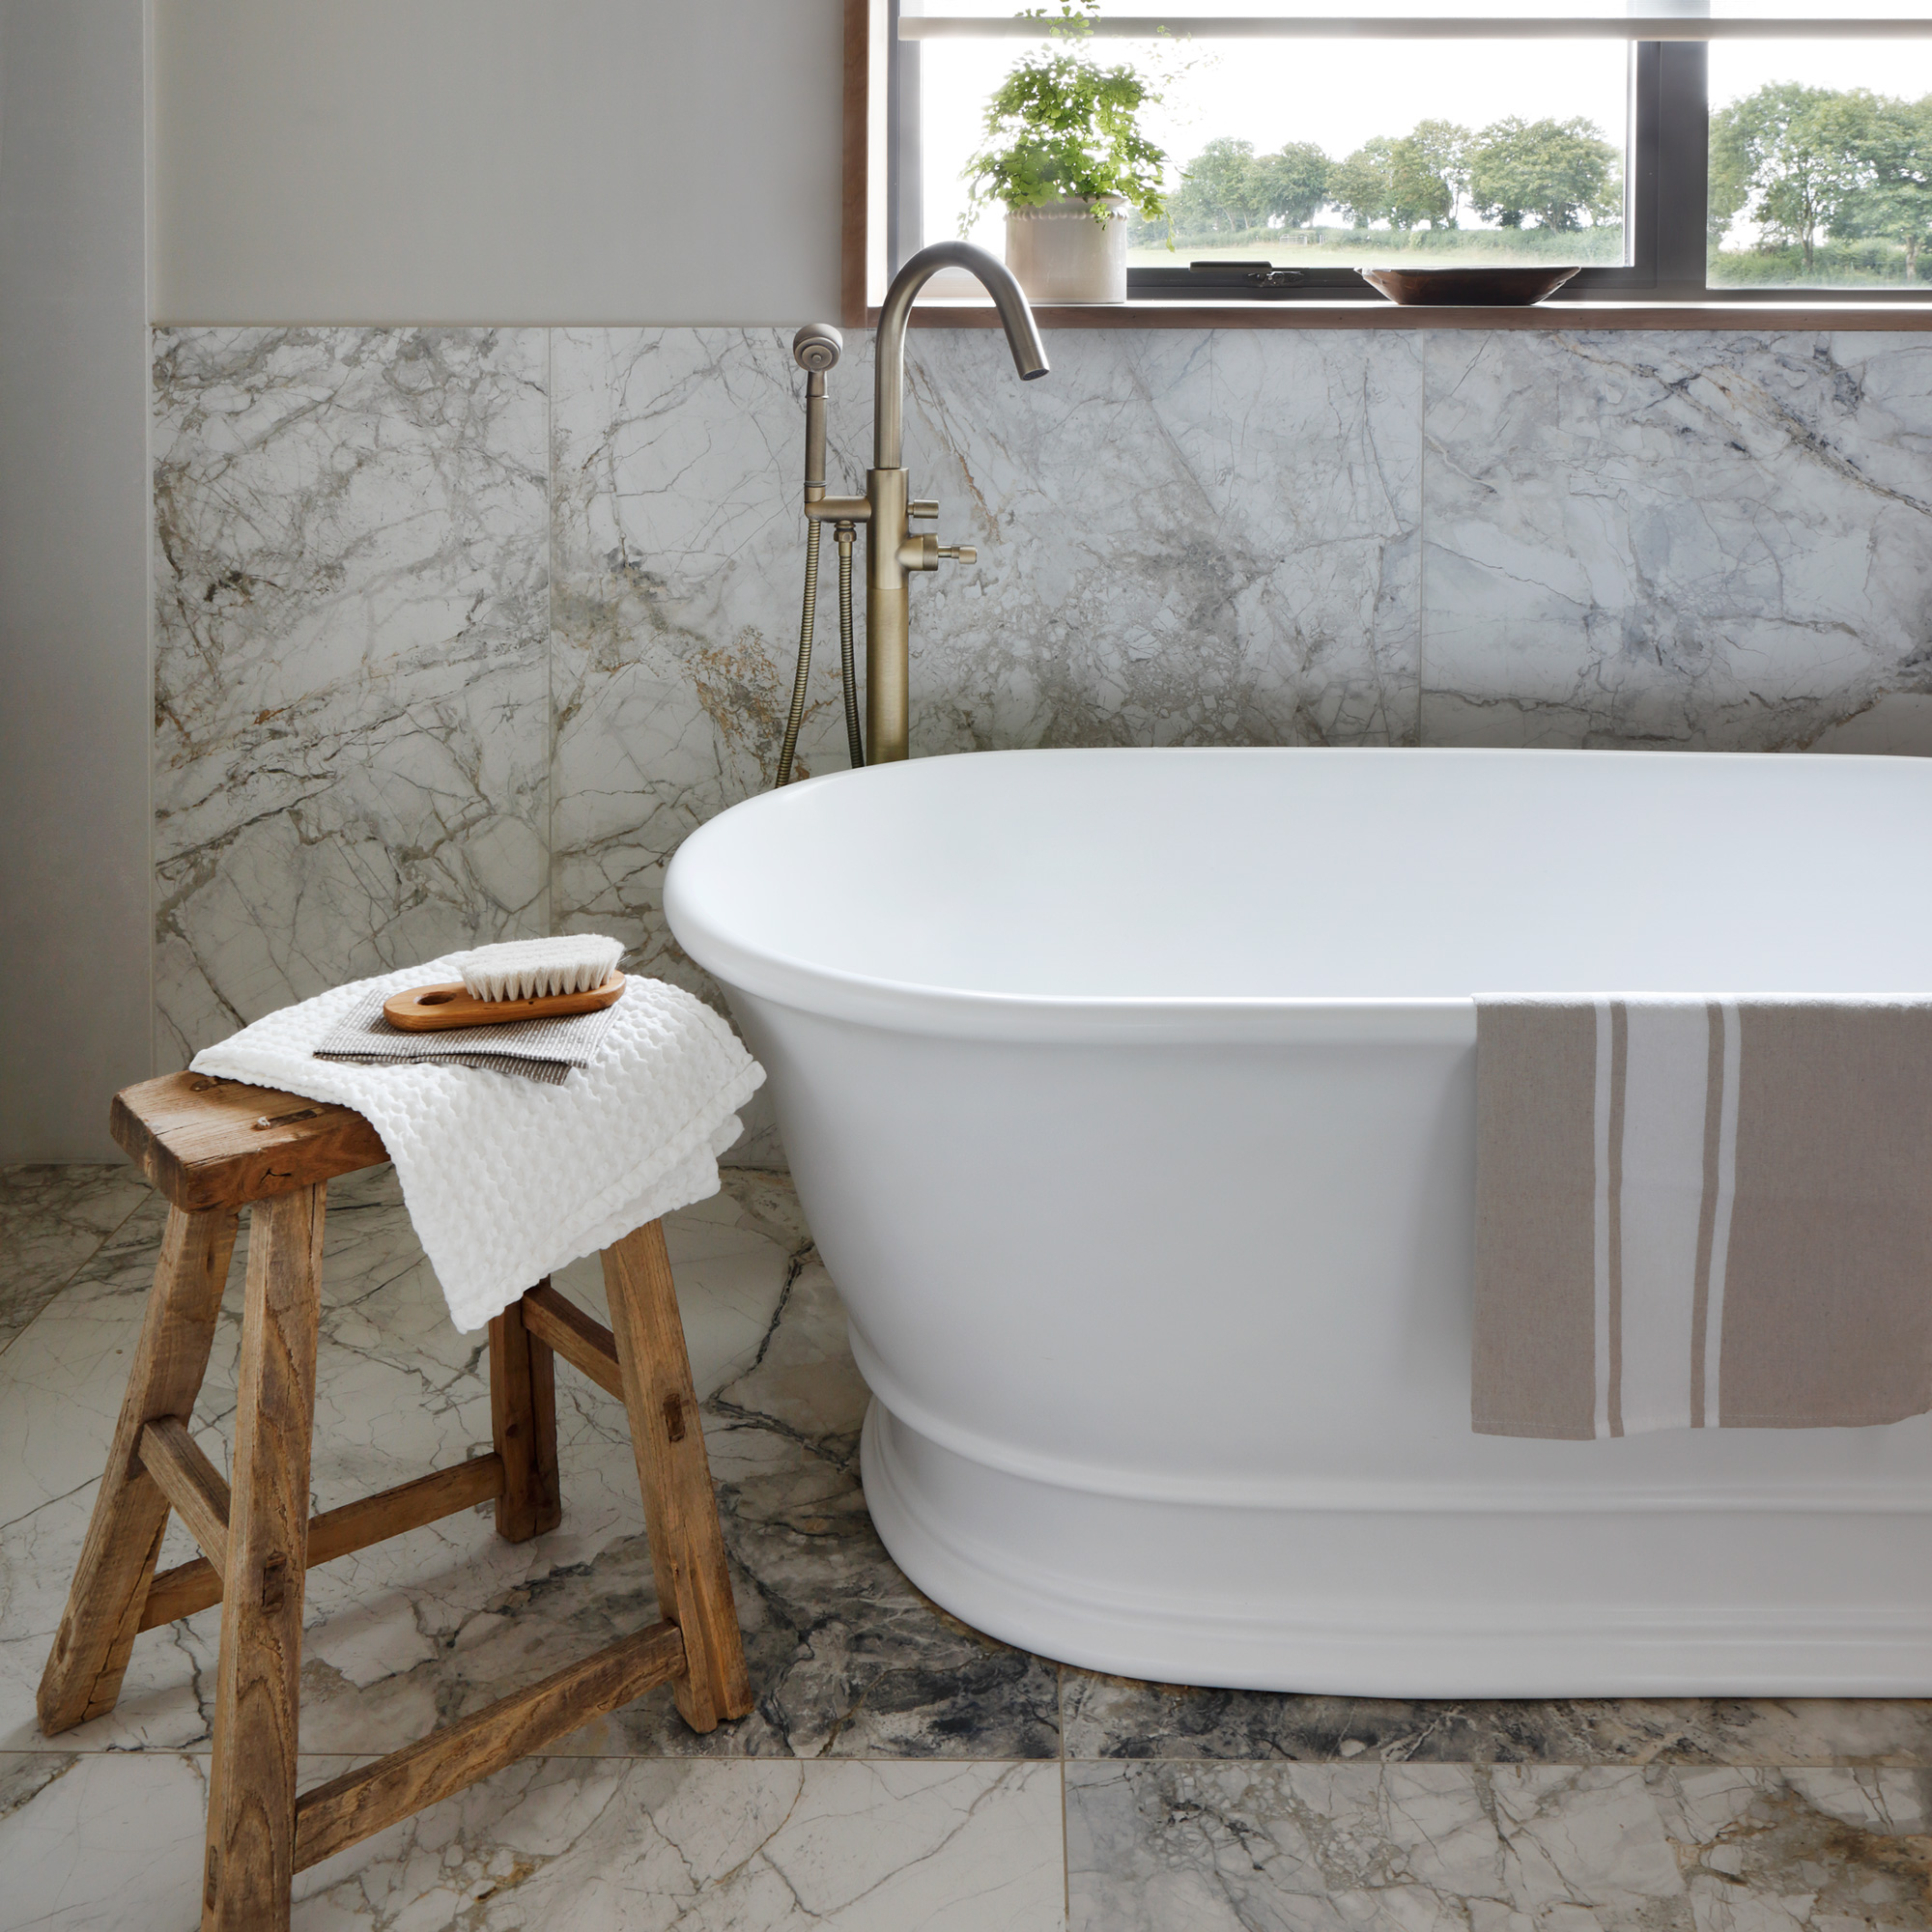 a neural bathroom with marble floor and wall tiles, a white bath tub and rustic wooden stool